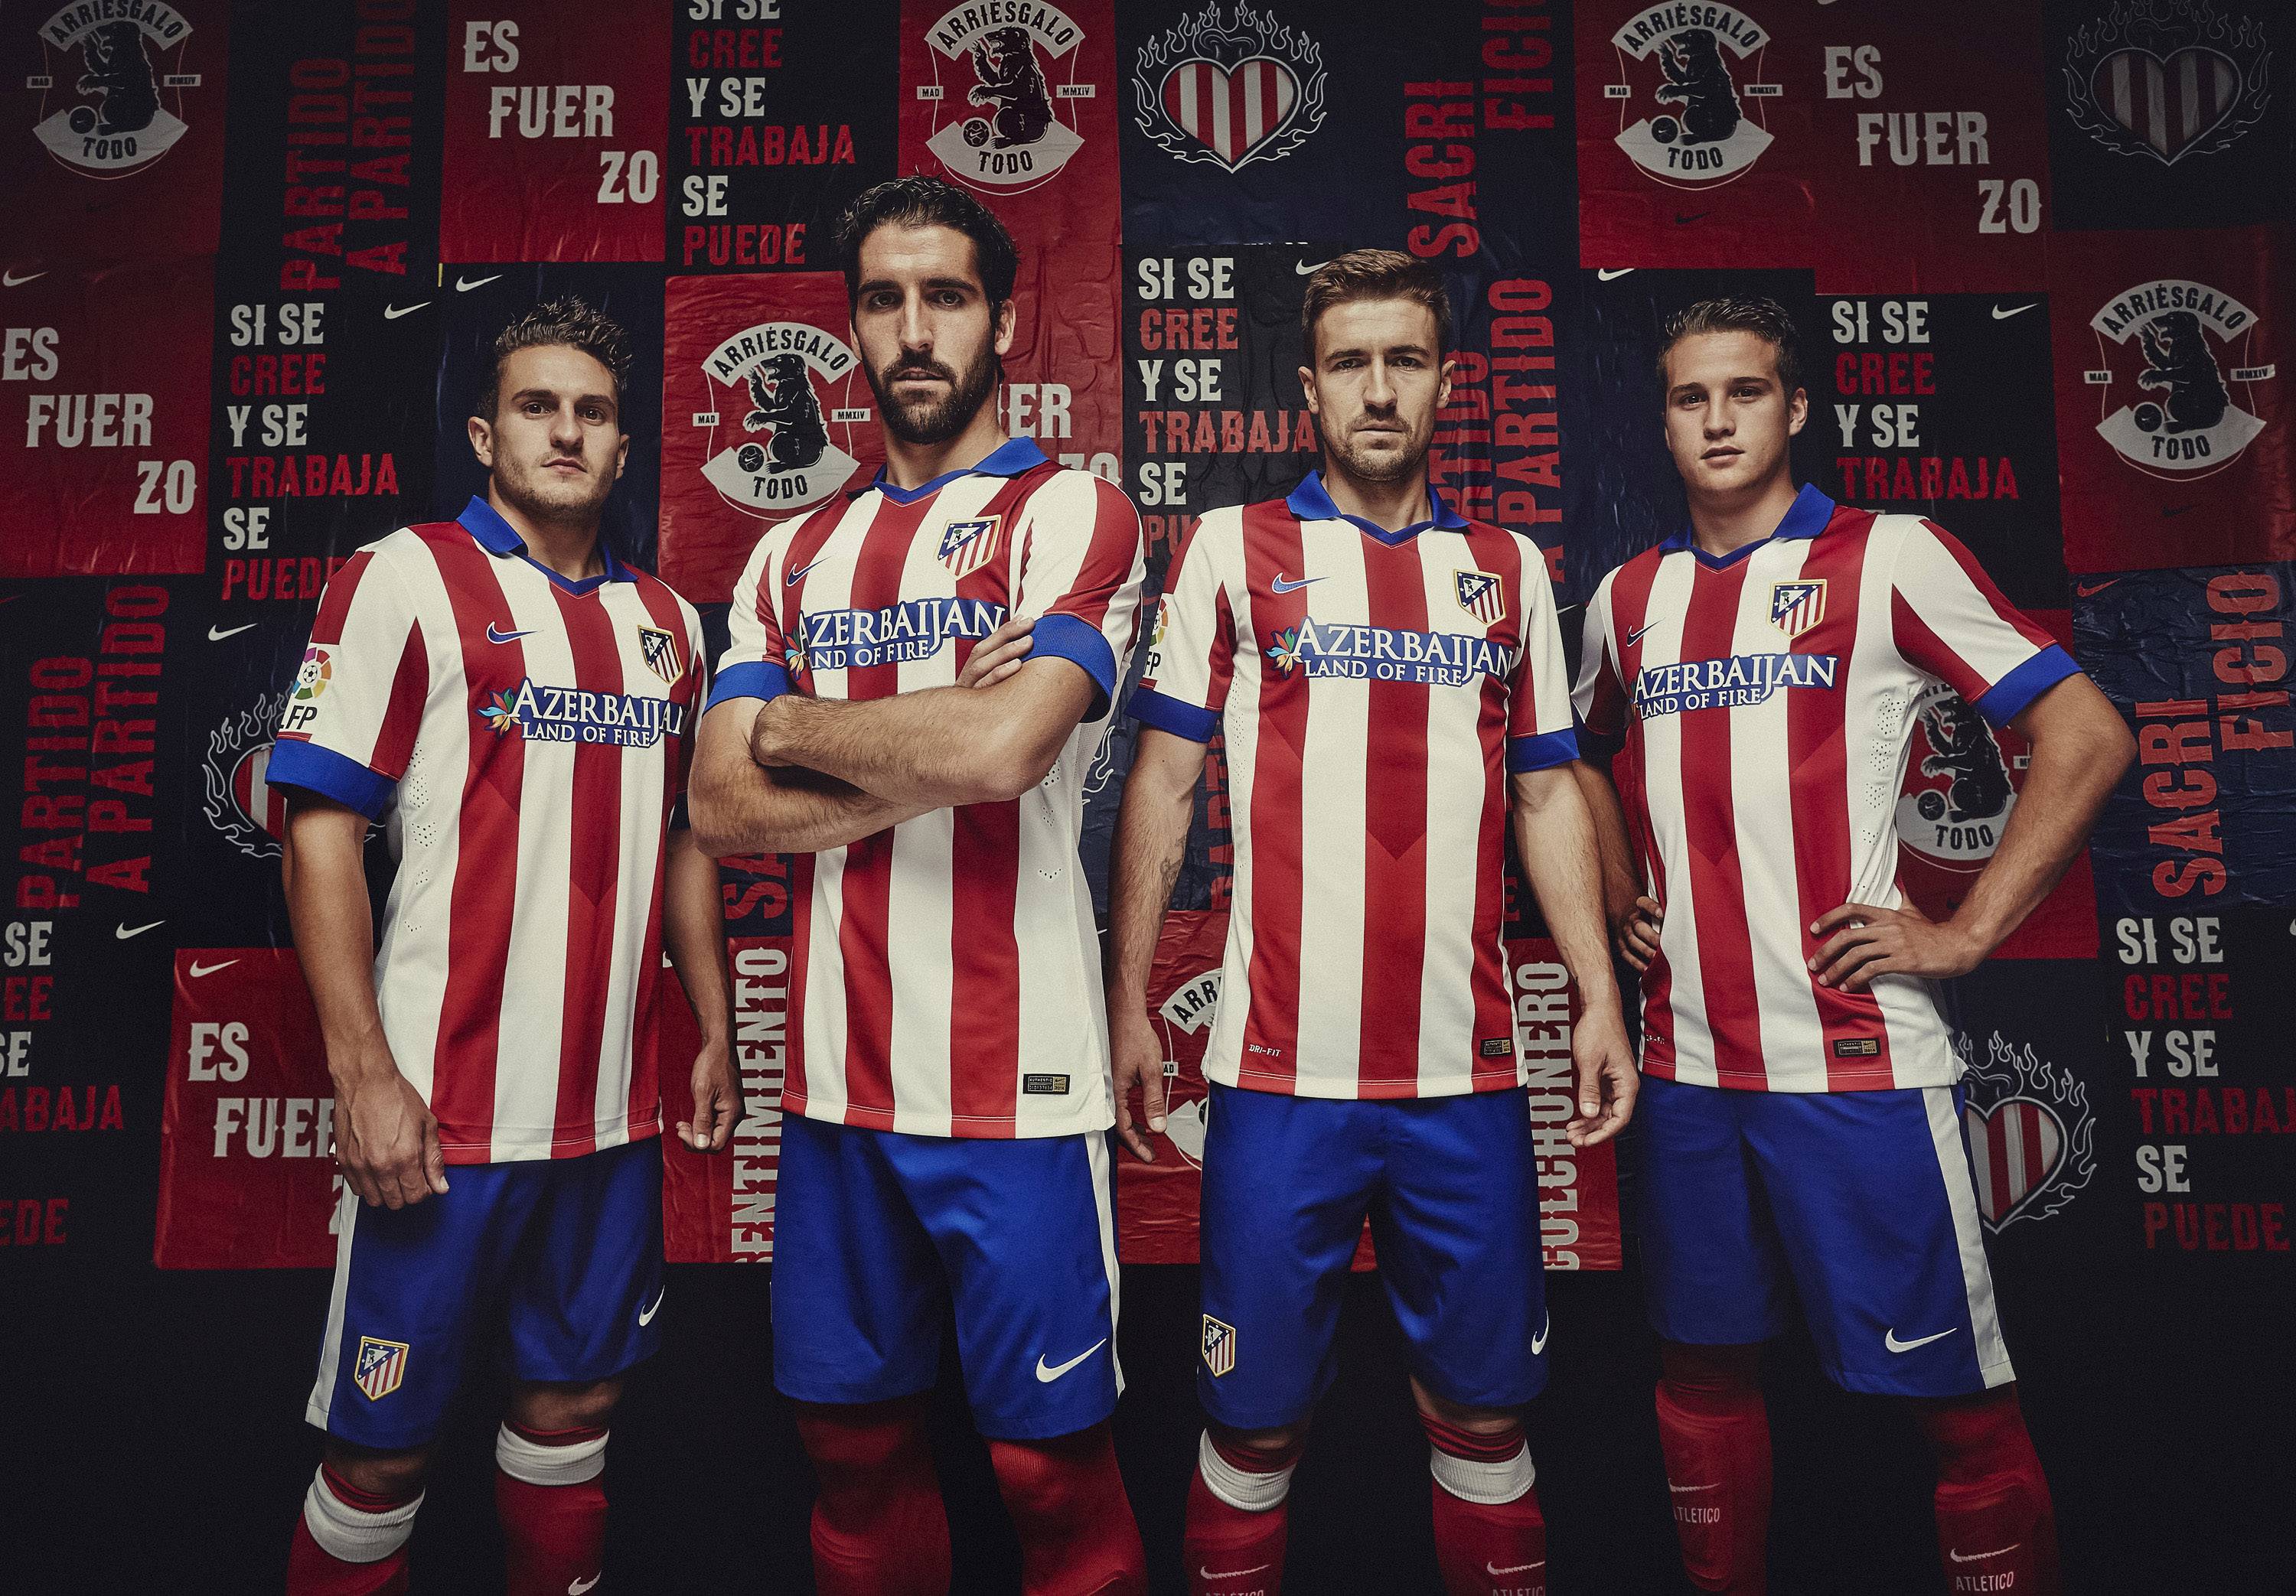 Atletico Madrid 2014 2015 Nike Home Kit Wallpaper Wide Or HD